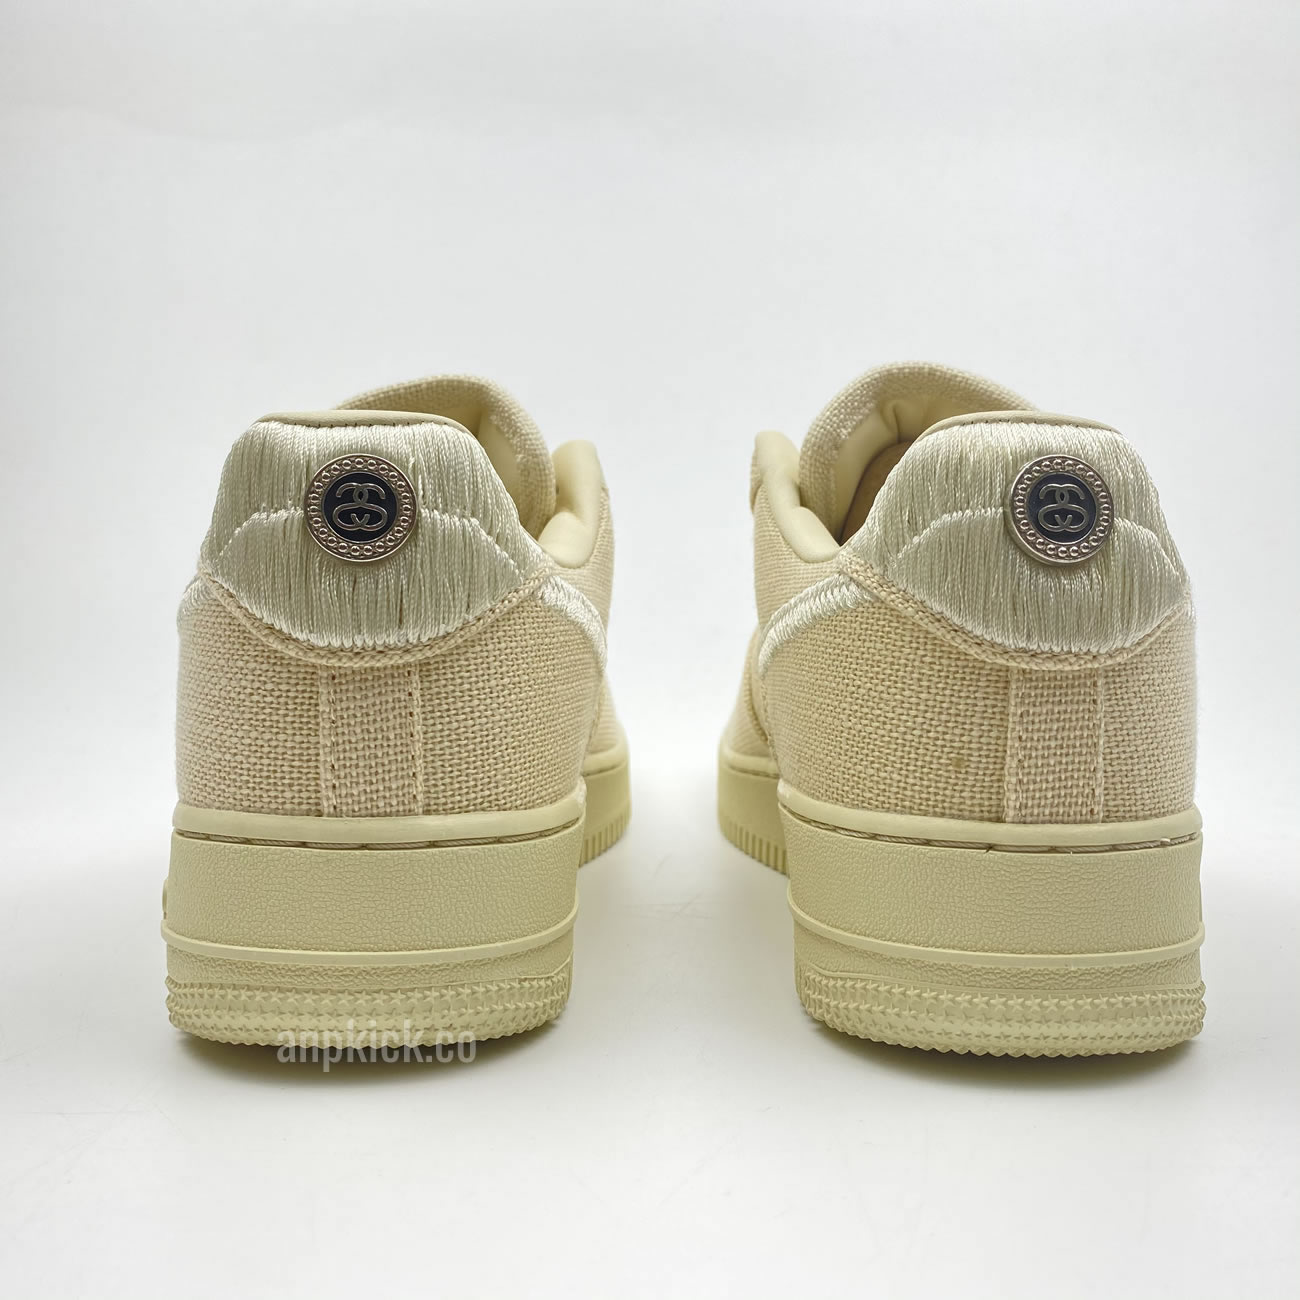 Stussy Nike Air Force 1 Low "Fossil Stone" CZ9084-200 Release Date